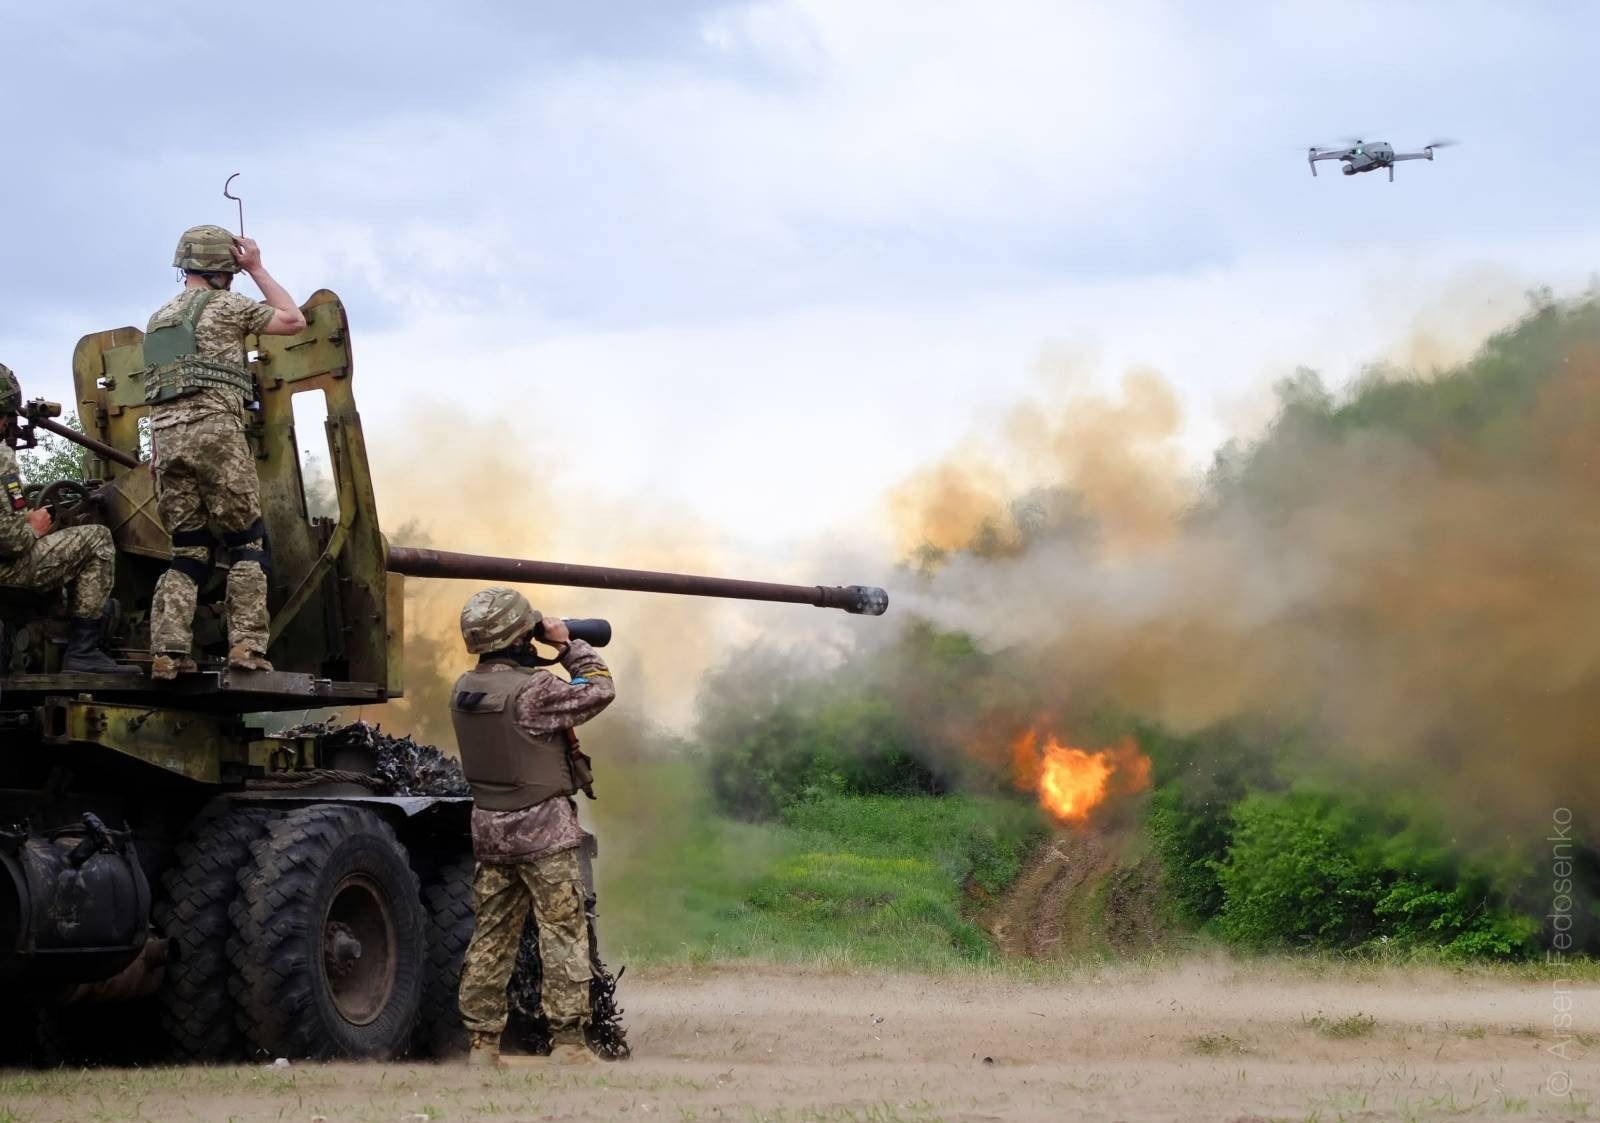 The Ukrainian military told how the rare 1947 S-60 anti-aircraft gun works in tandem with a modern drone